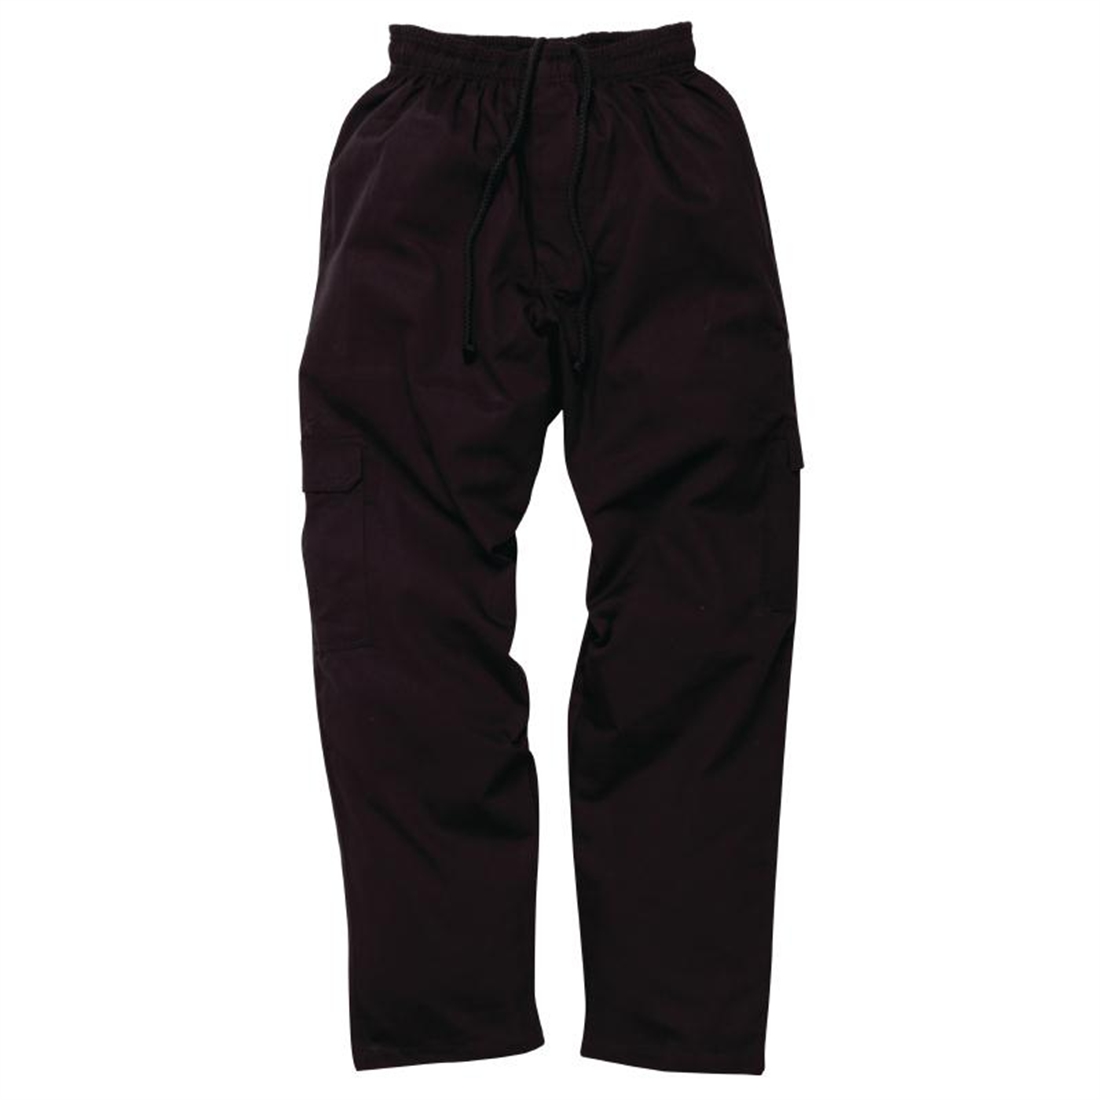 Chef Works Mens J54 Cargo Trousers Black XL